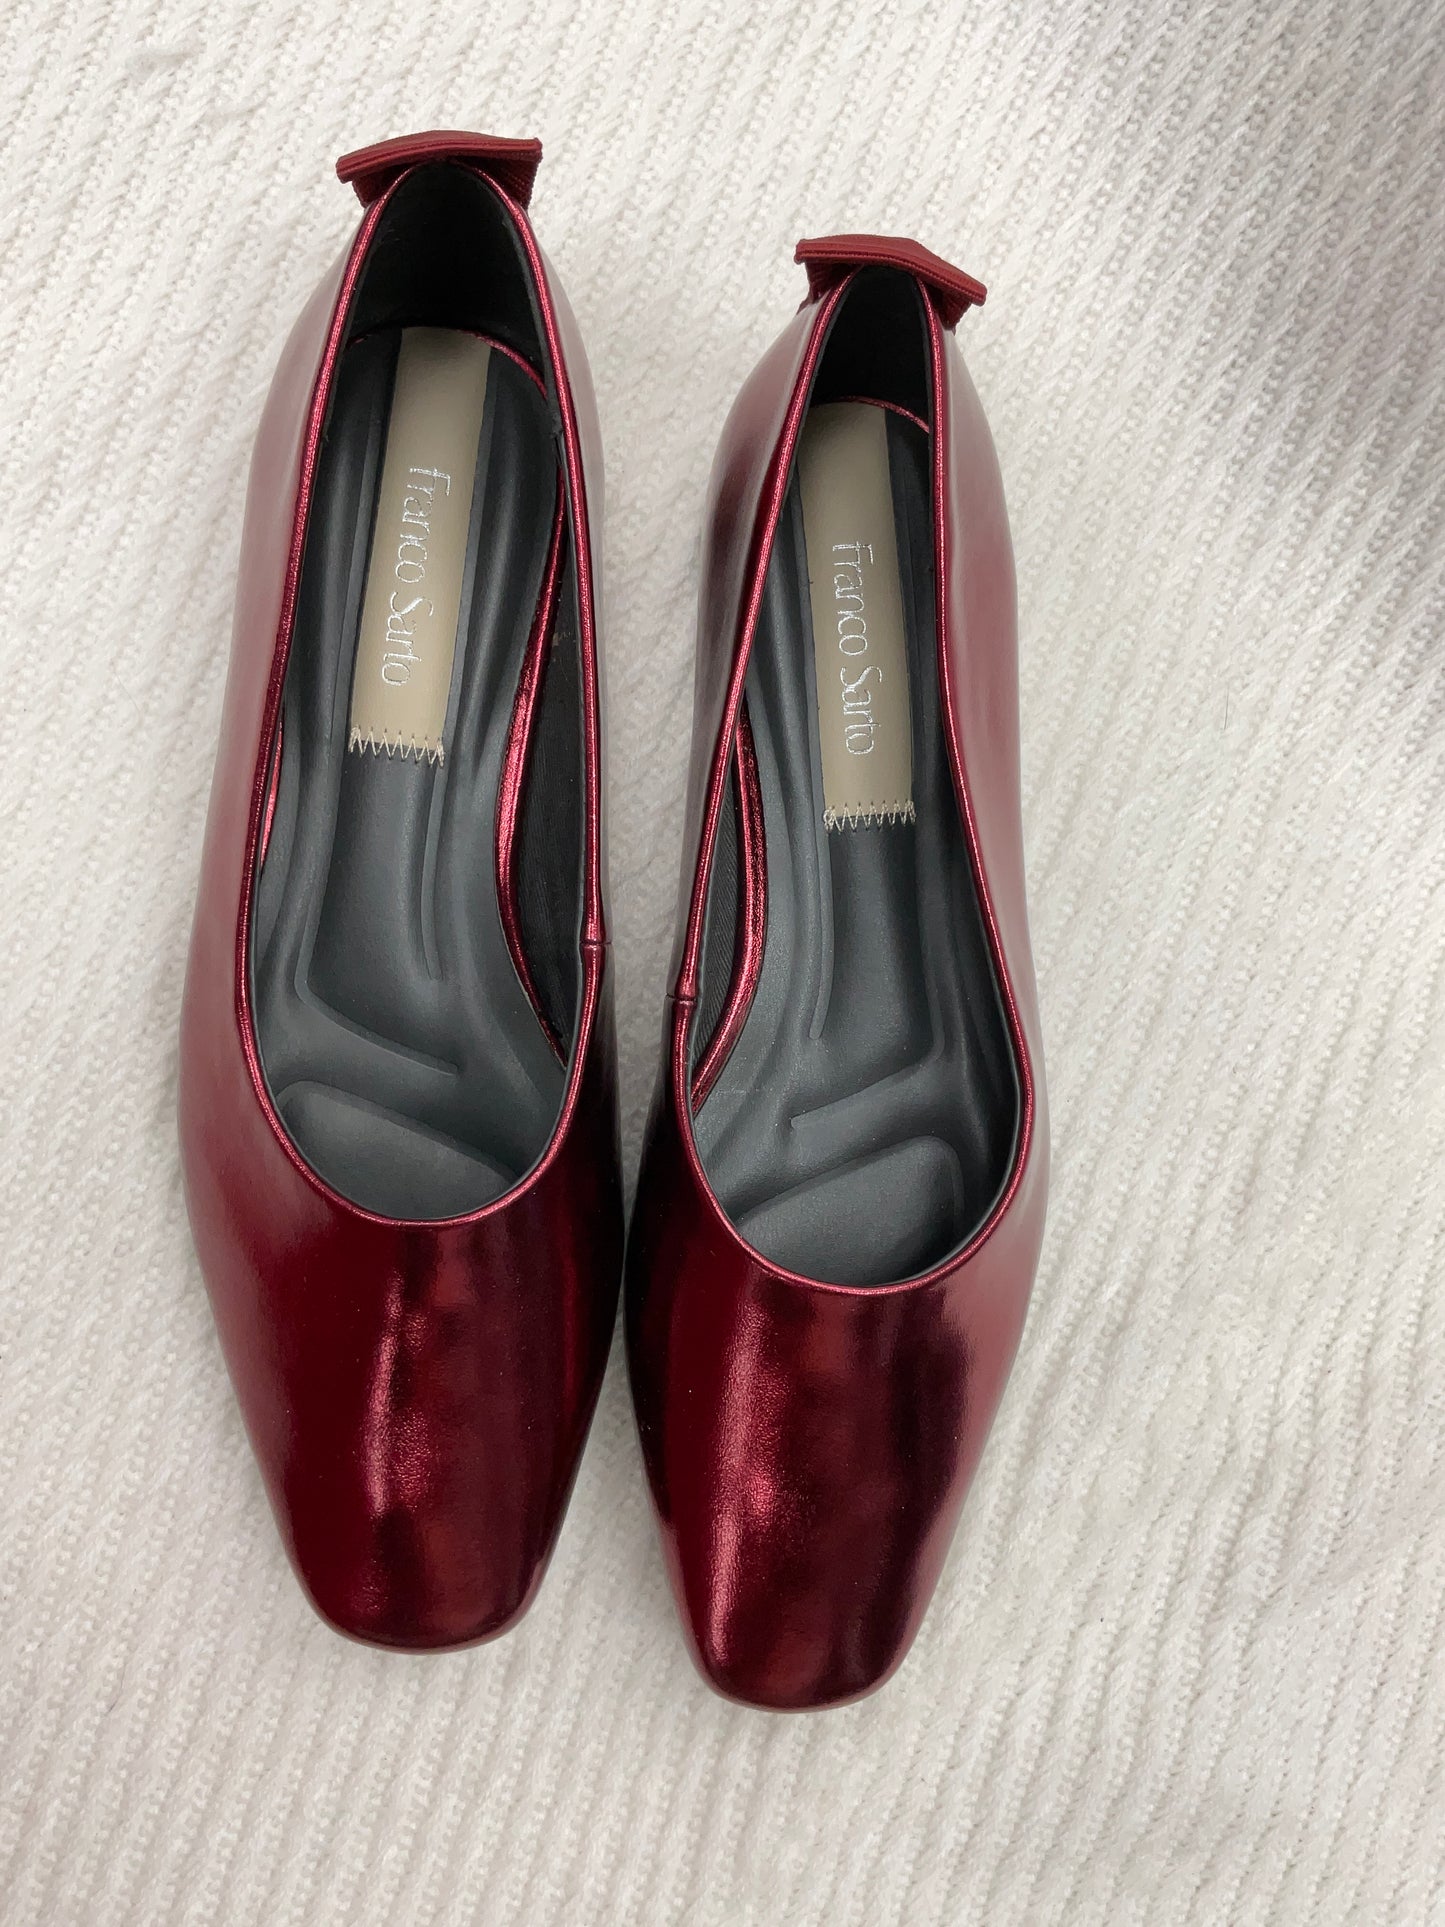 Shoes Flats By Franco Sarto  Size: 6